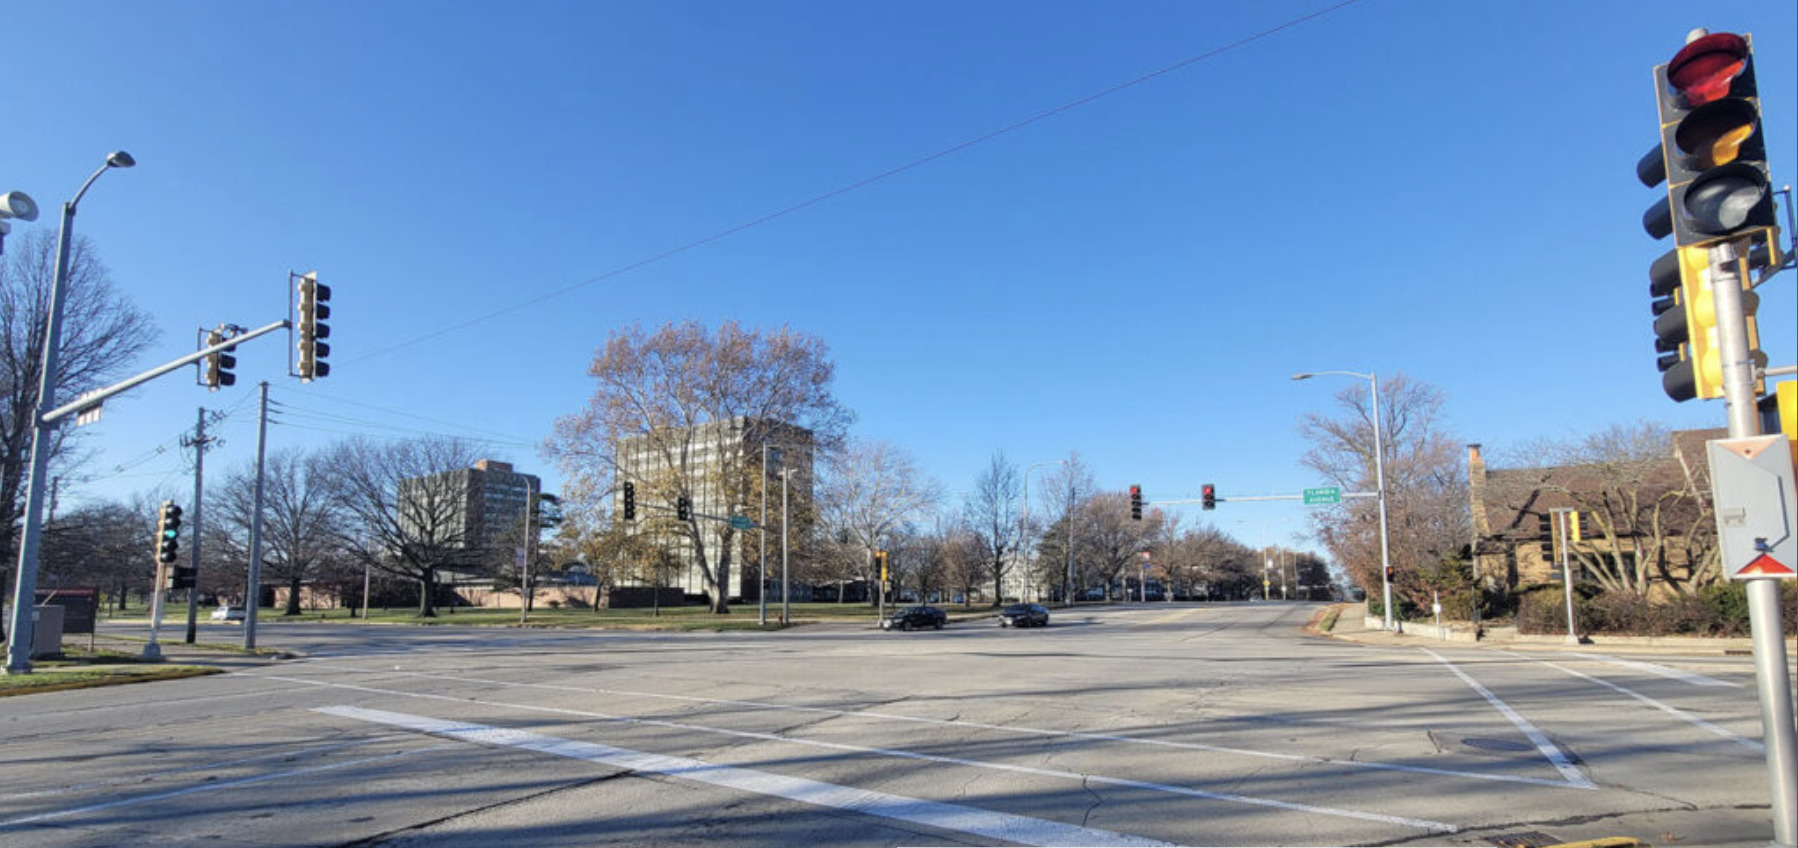 Intersection of Lincoln and Illinois in Urbana. The intersection is mostly empty. Only two cars are pictured across the intersection from the photographer.